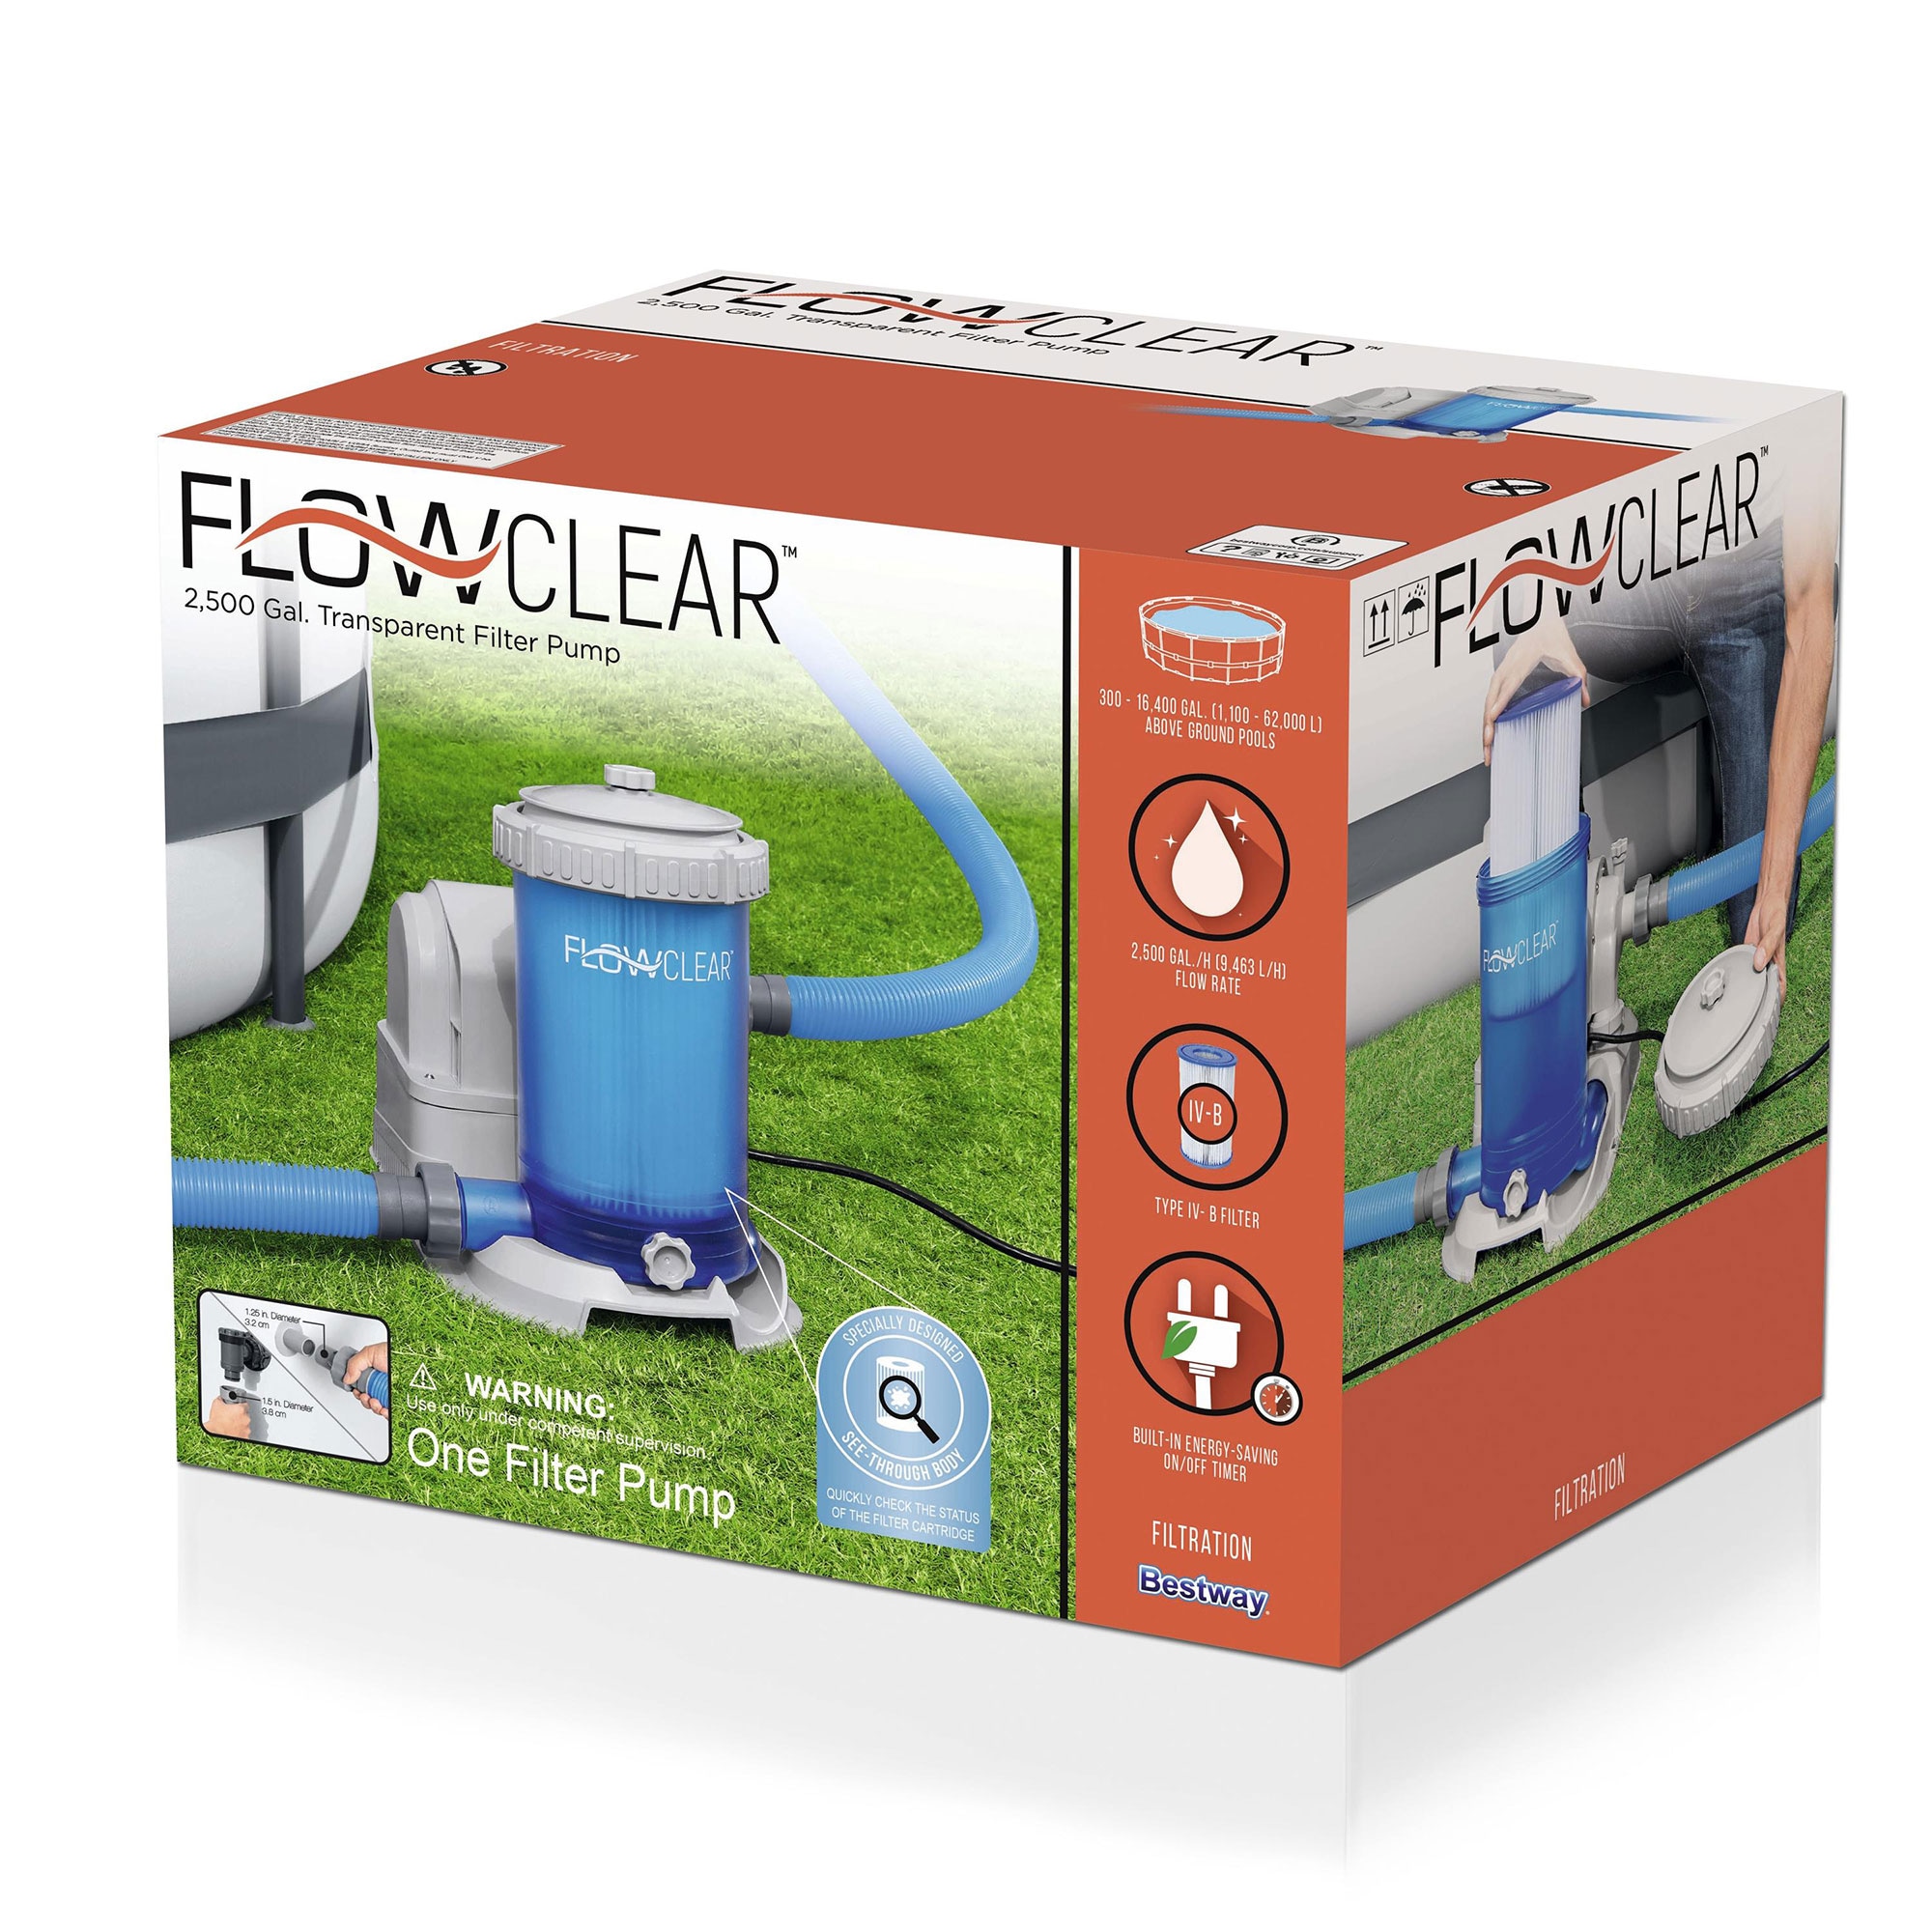 Bestway Bestway 58671E-BW Flowclear Transparent Filter Above Ground Pool  Pump 2500 GPH at